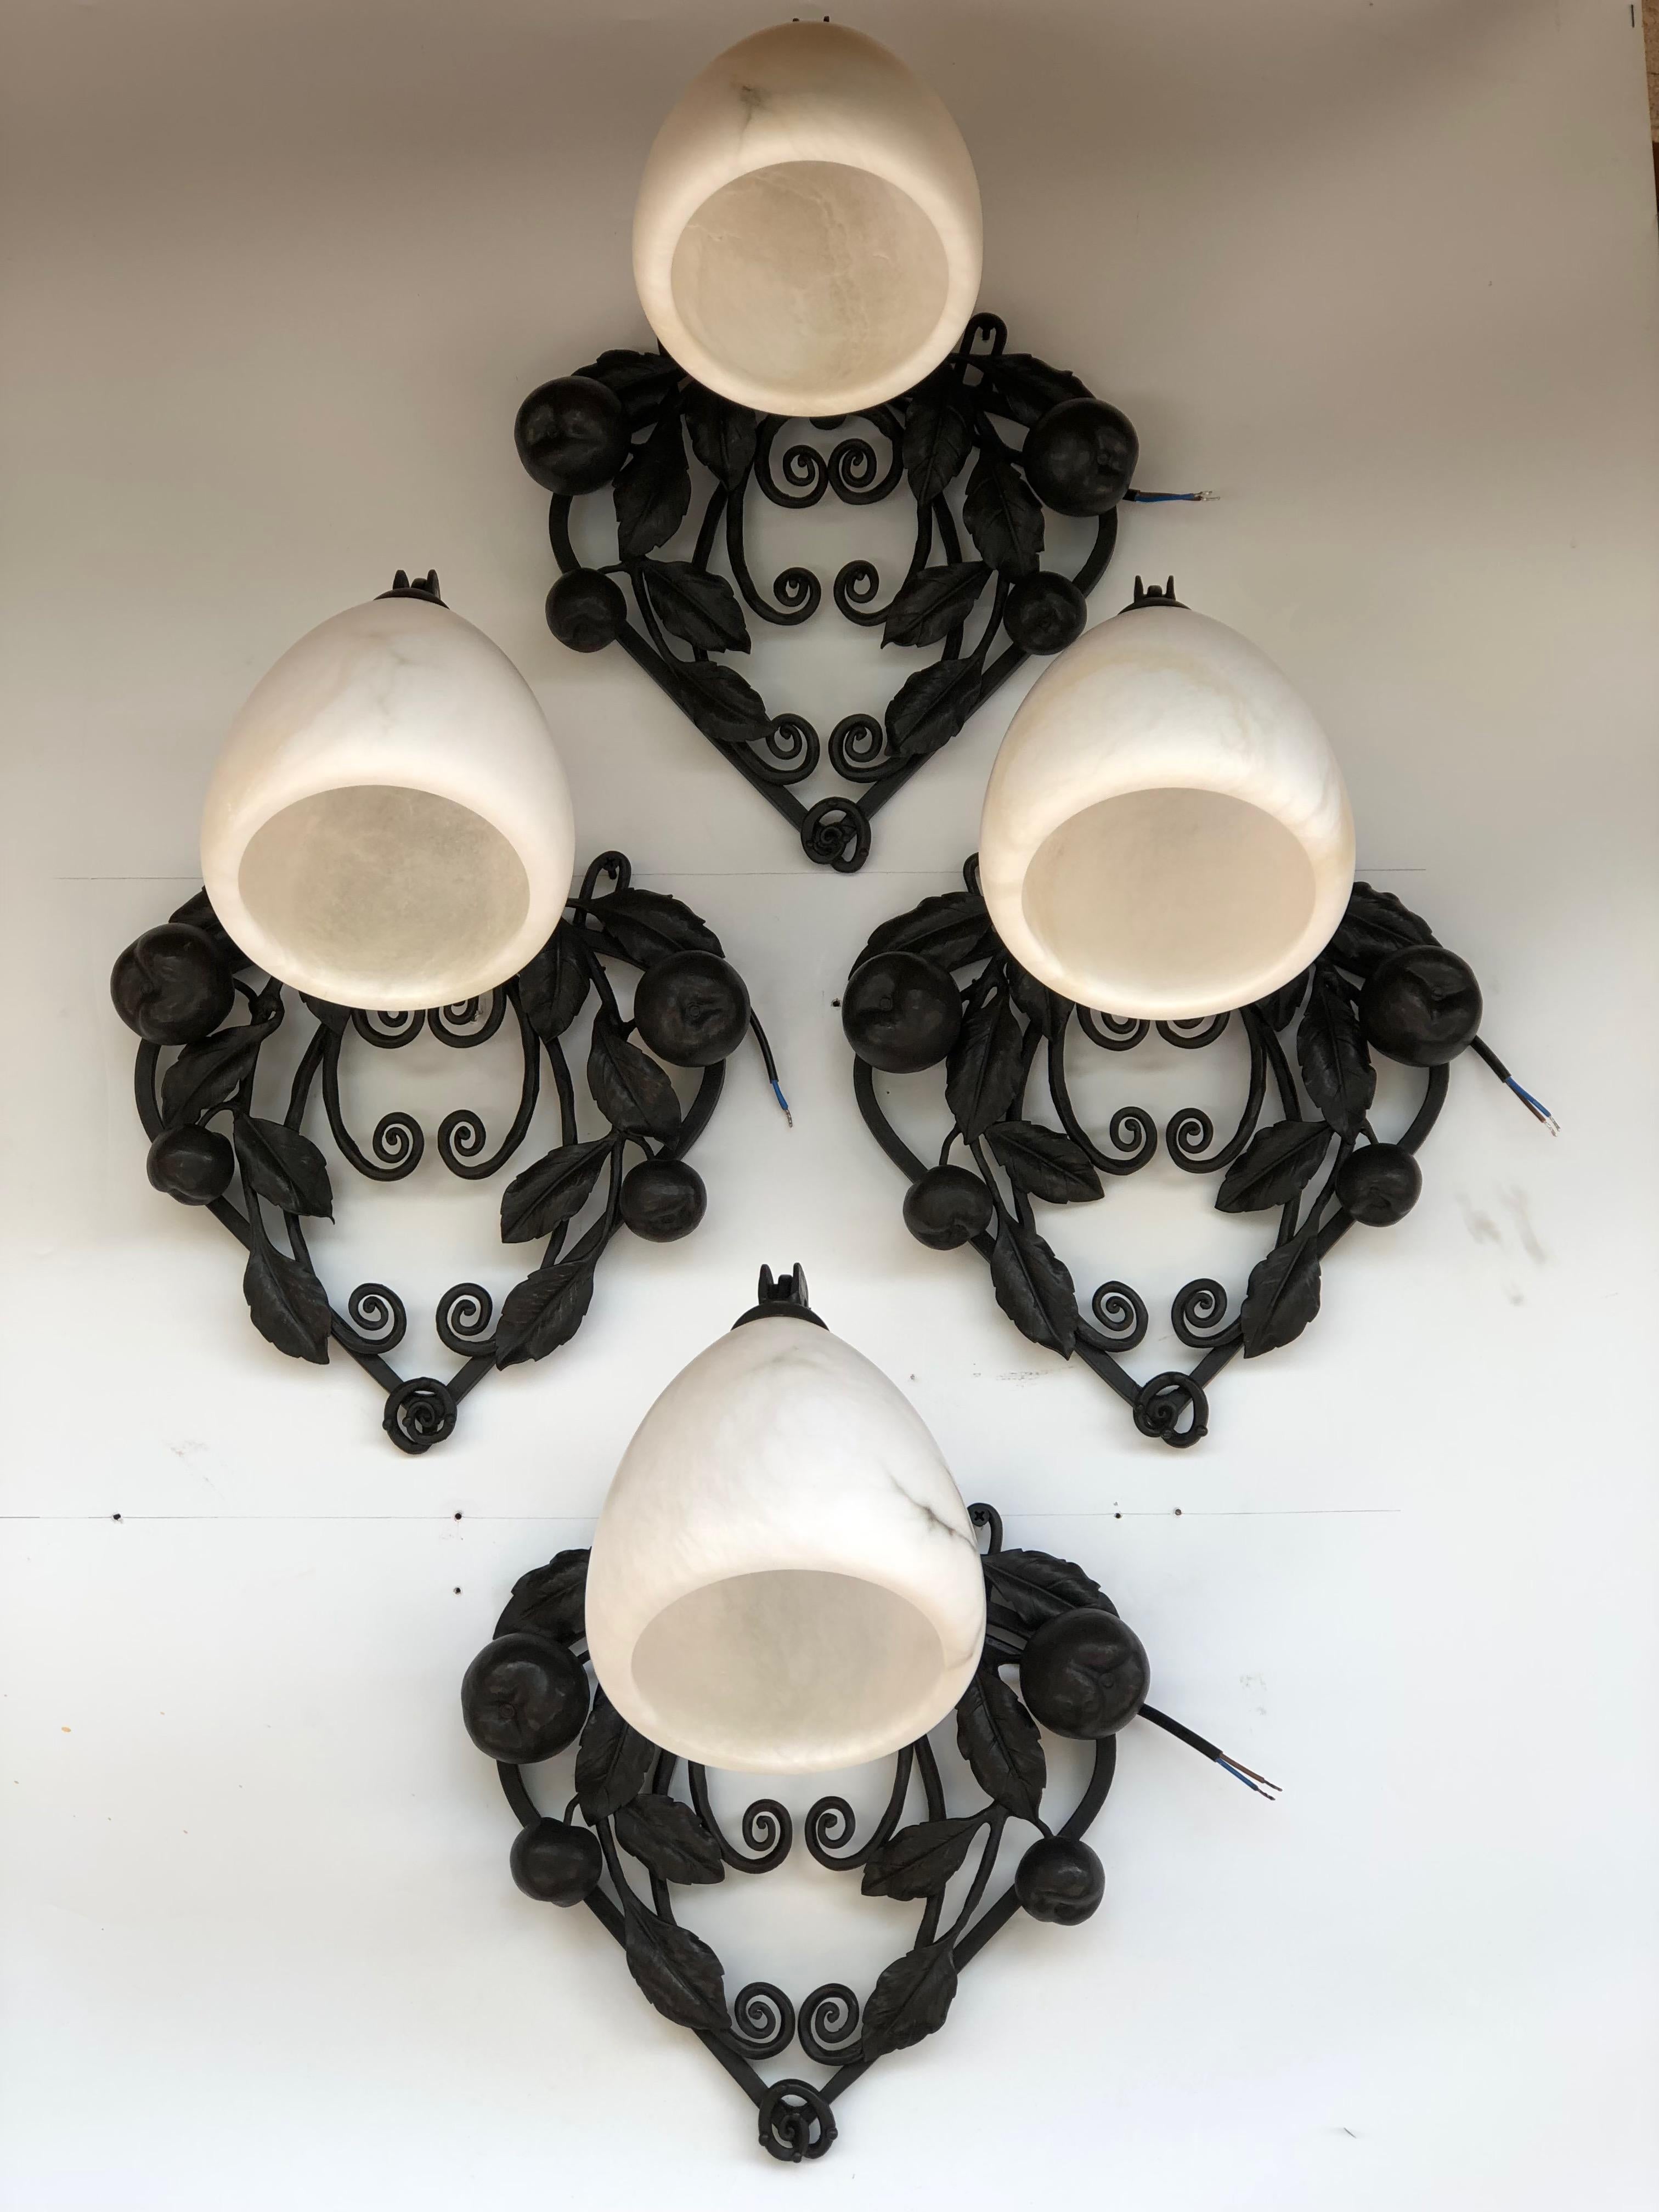 Suite of 4 Art Deco sconces circa 1925.
Wrought iron frame richly decorated with apples.
Alabaster tulips.
In perfect condition and electrified
Width: 27 cm /10,63 in
Height: 32 cm /12,59 in
Depth: 27,5 cm /10,82 in
Weight: 10 kg.